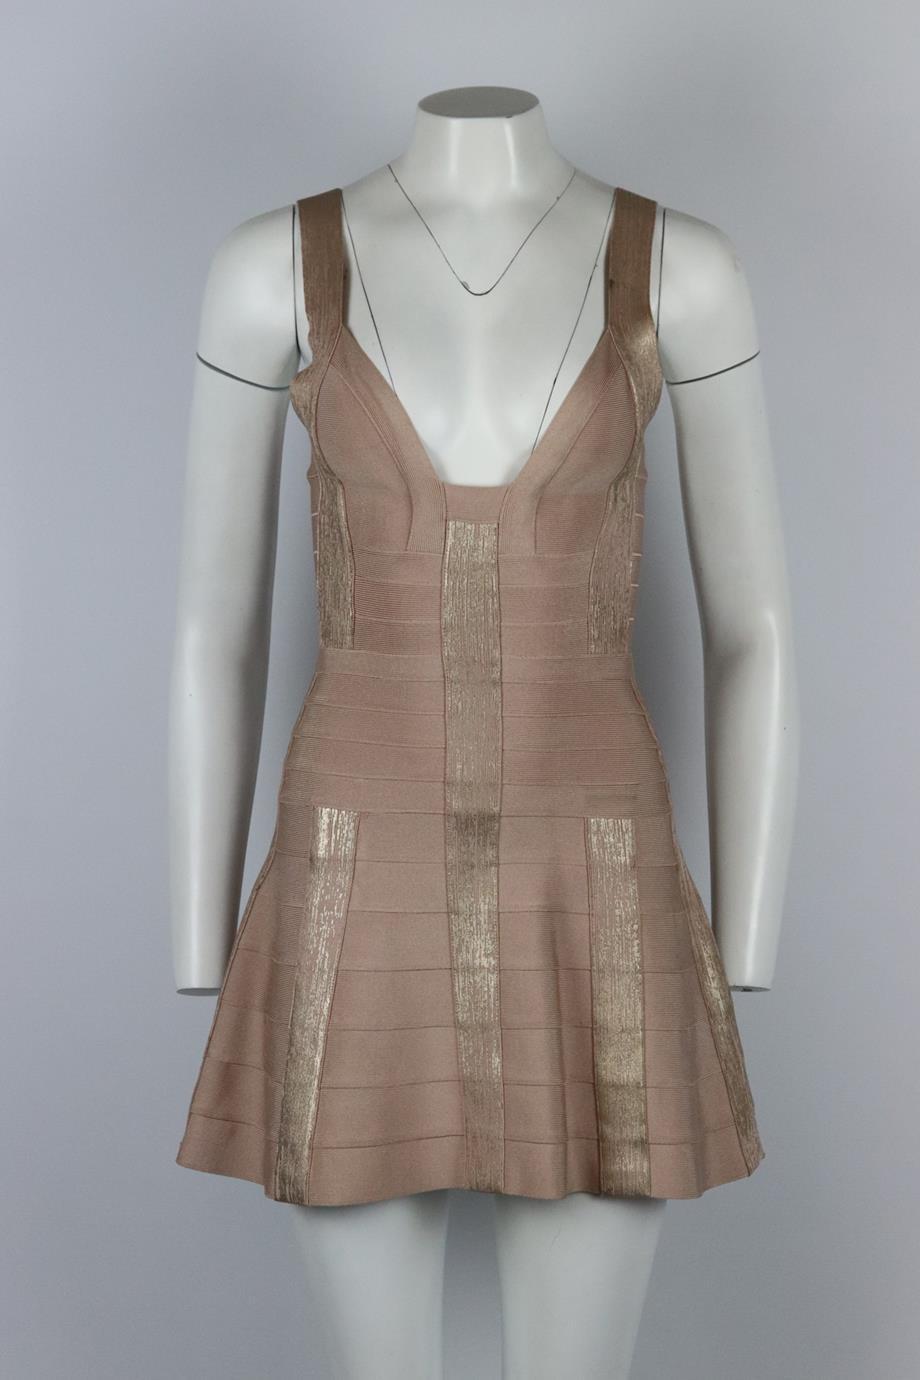 Herve Leger metallic bandage mini dress. Rose-gold and pink. Sleeveless, sweetheart neckline. Zip fastening at back. 90% Rayon, 9% nylon, 1% spandex. Size: XSmall (UK 6, US 2, FR 34, IT 38). Bust: 27.2 in. Waist: 21.8 in. Hips: 42 in. Length: 31.75